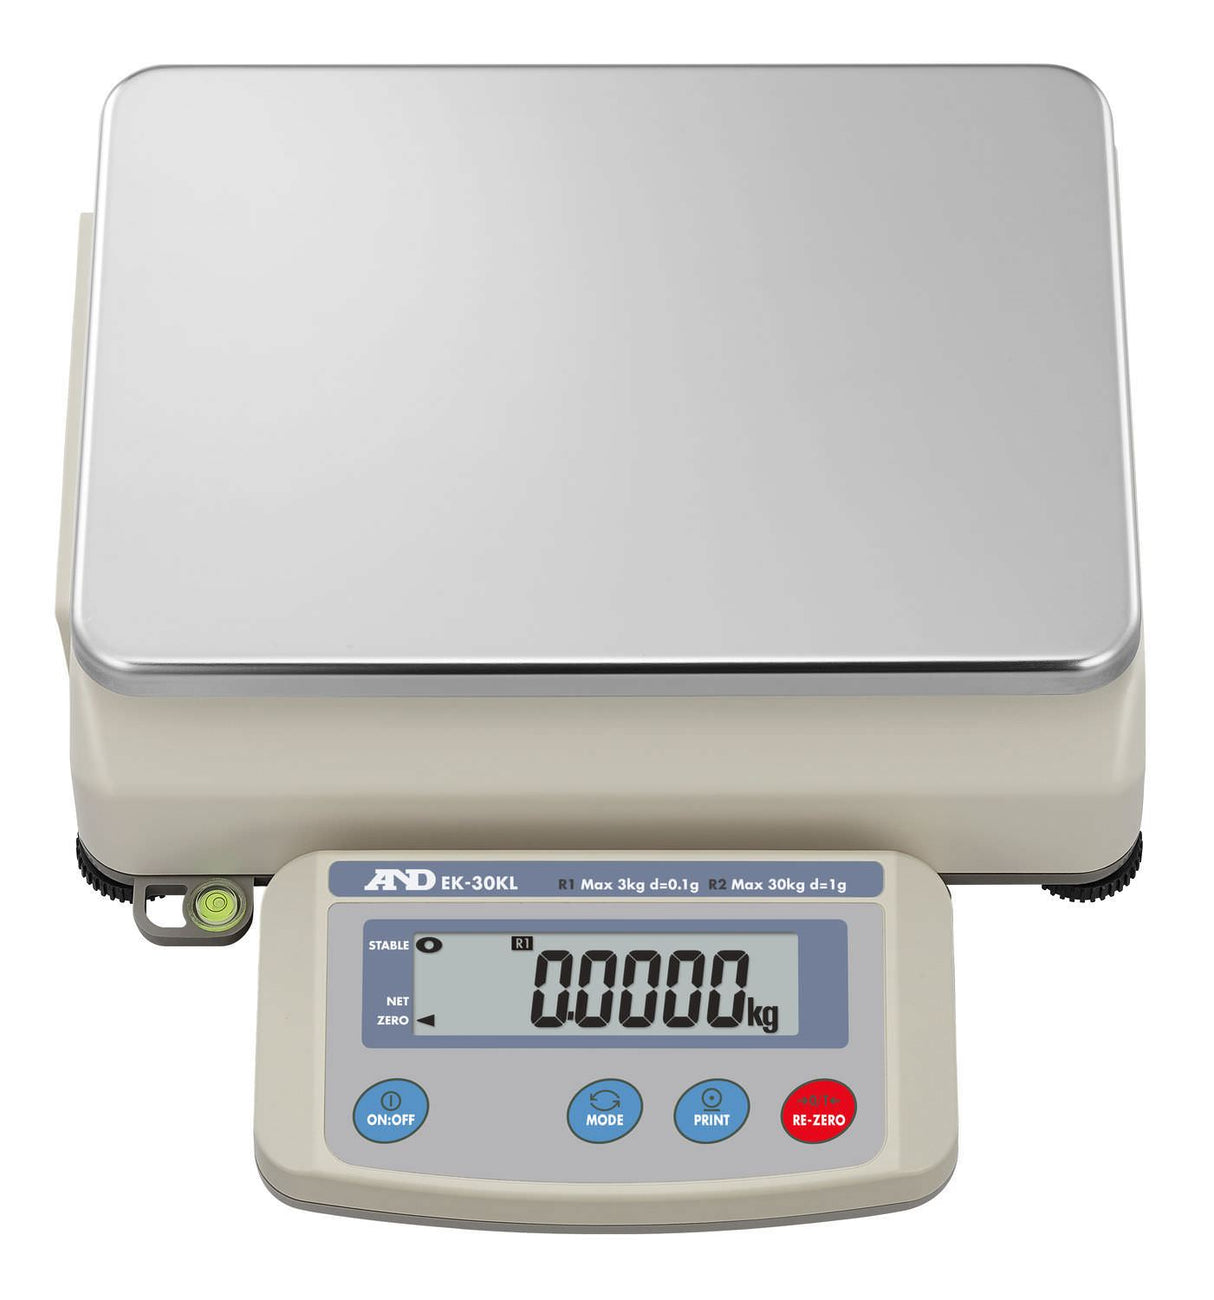 AND Weighing EK-30KL Precision Bench Scale, 3/30 kg Capacity, 0.1/1 g Readability